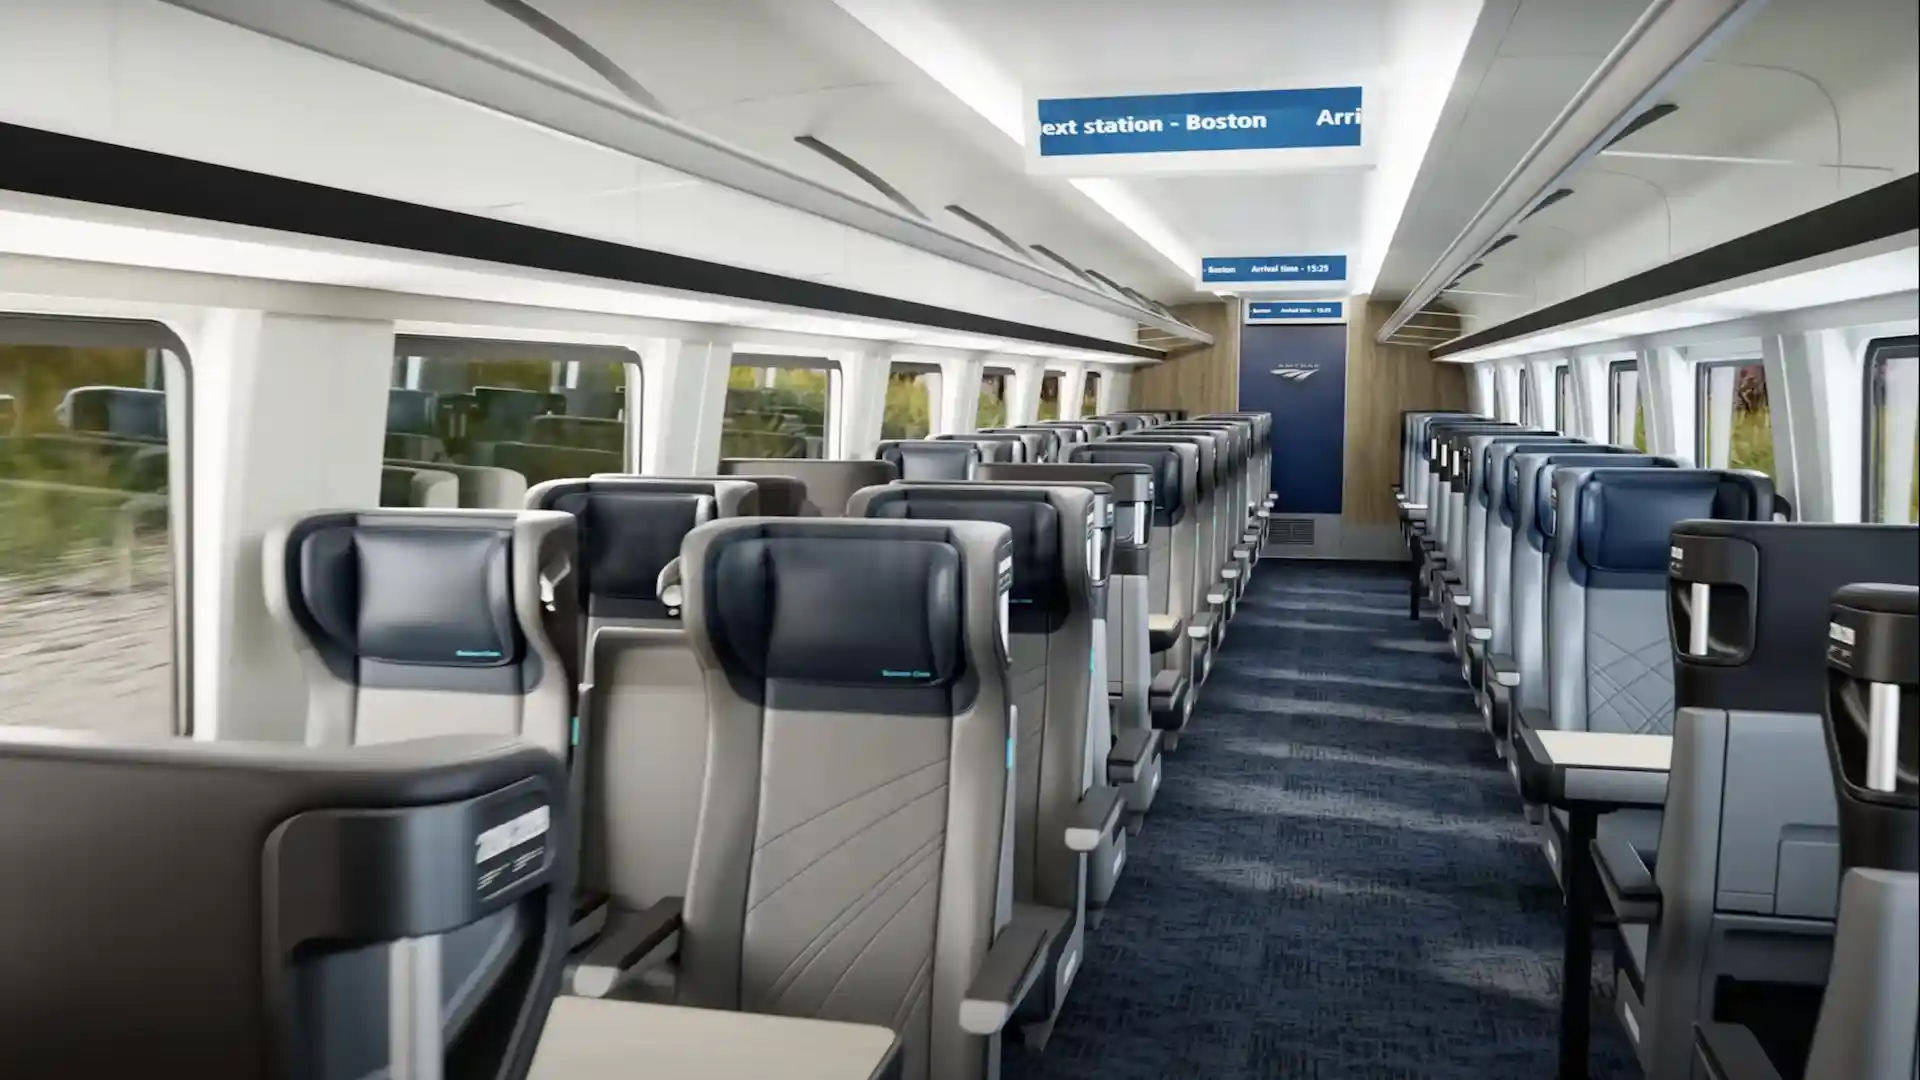 This is how modern Amtrak Airo trains look in pictures